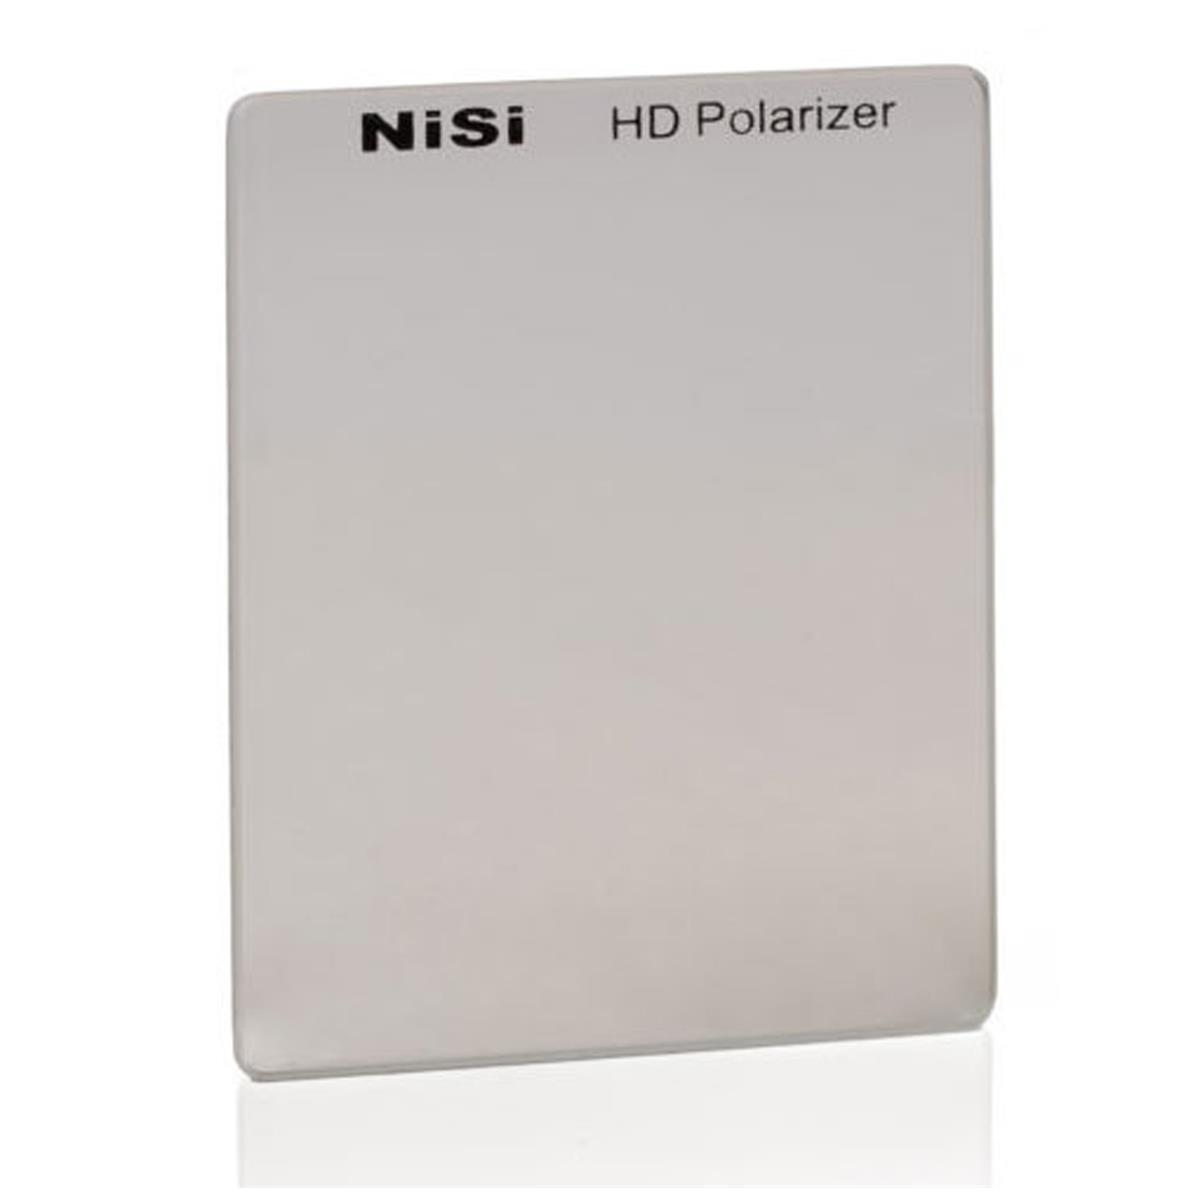 

NiSi P1 Prosories HD Polarizer for Mobile Phones and Compact Camera Systems